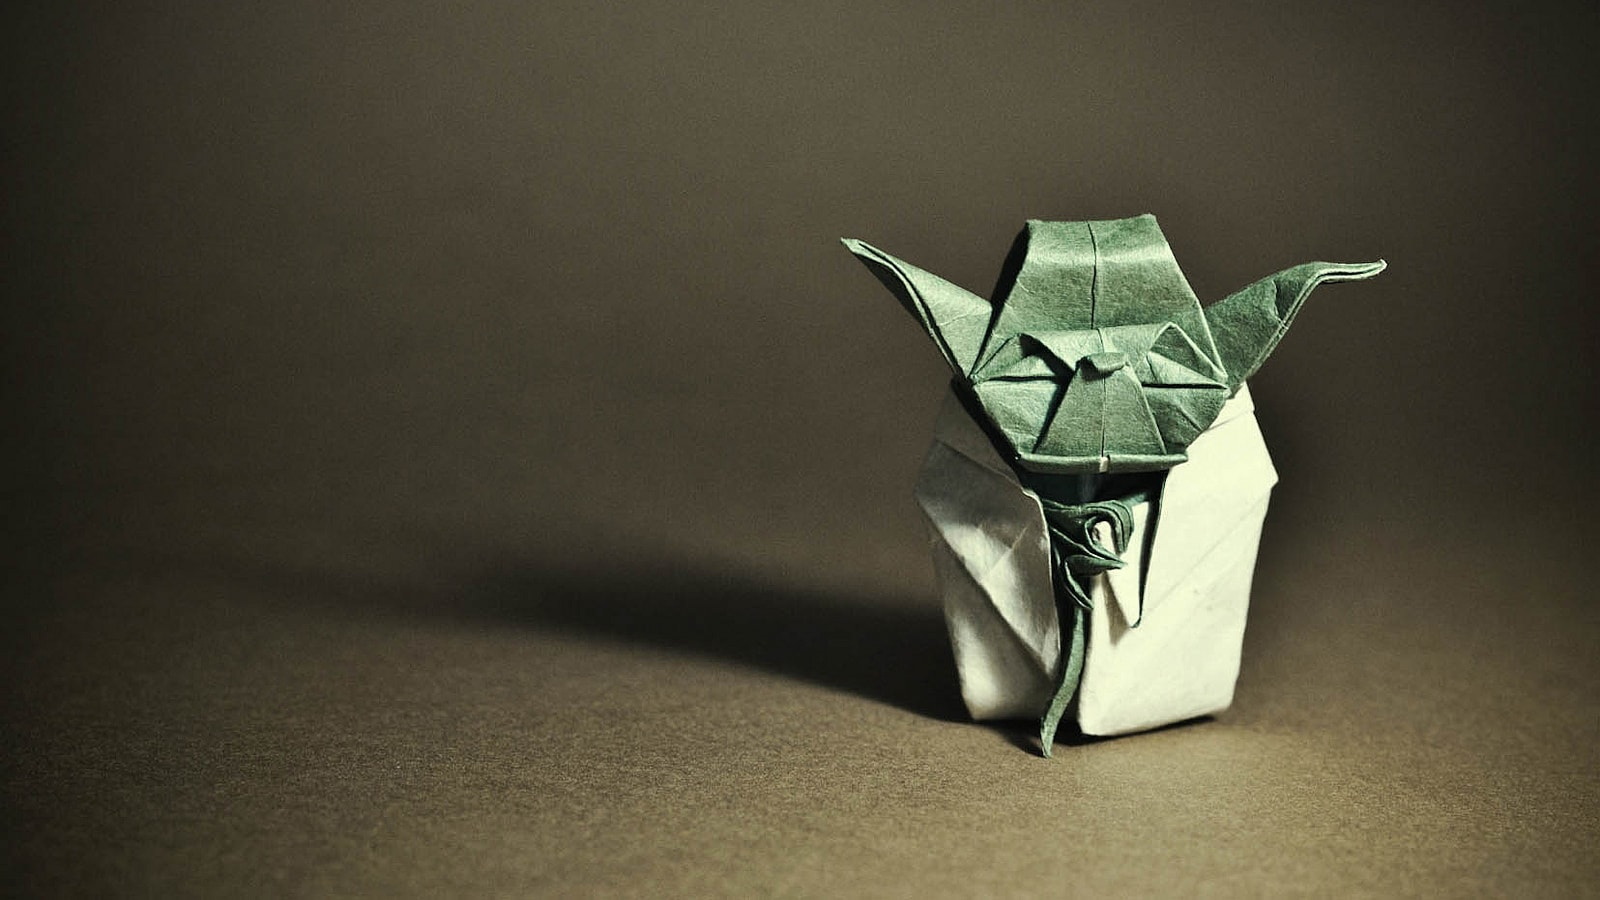 Origami Yoda The Movie Some Of My Favourite Star Wars Origami To Celebrate Star Wars Day